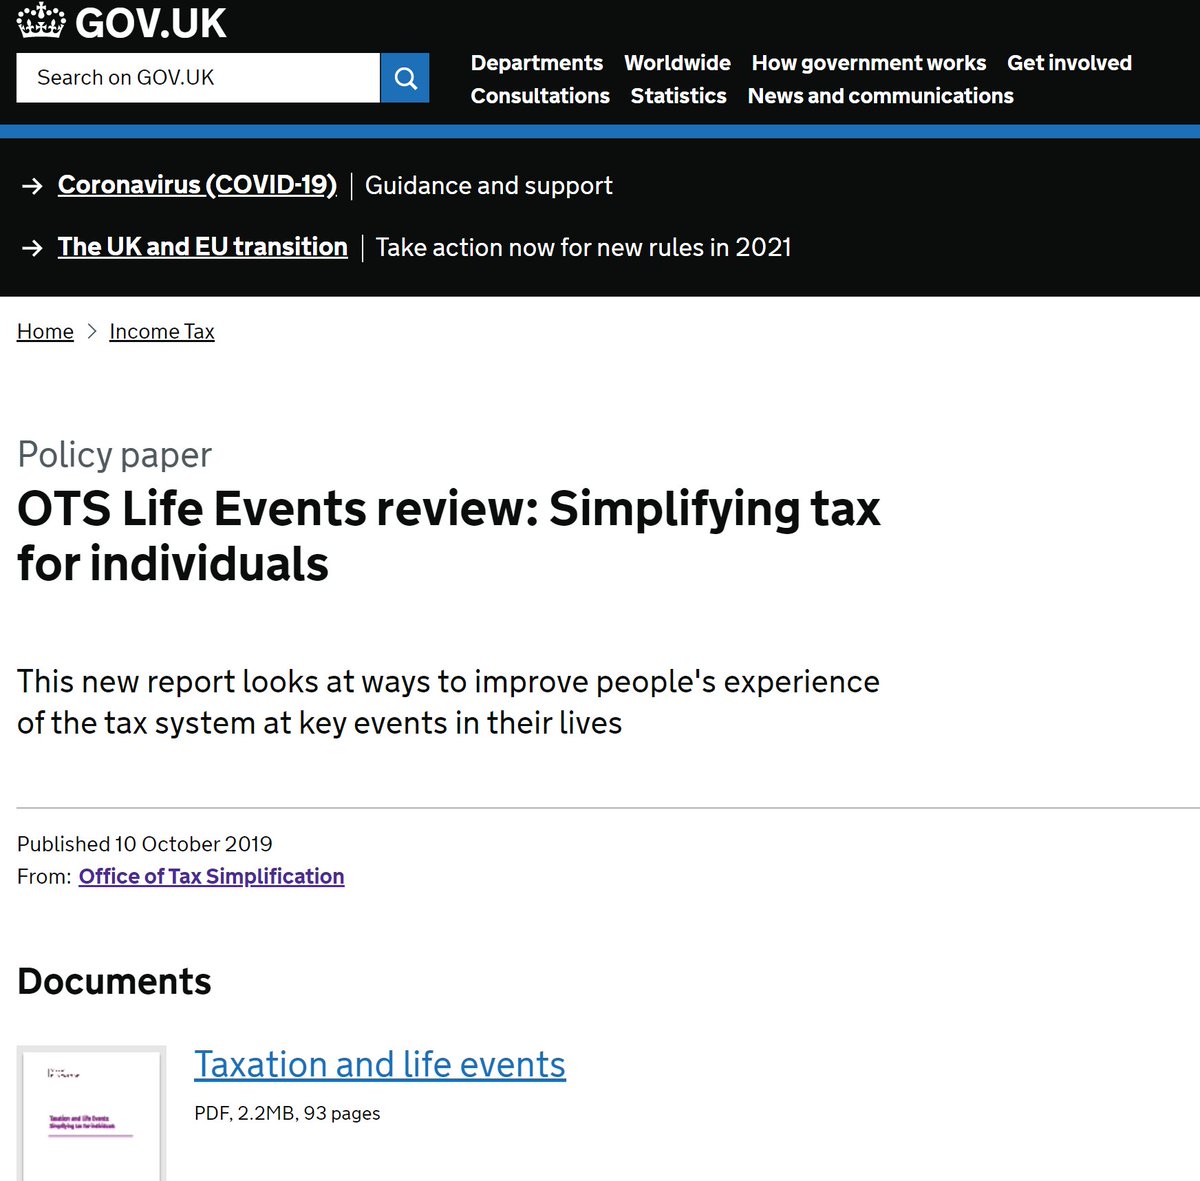 24/ Once again this thread shows what a throughly stupid and overcomplicated tax this is. It really is a completely inappropriate tax in the context of a DB scheme, and must be scrapped, as per the OTS recommendation  #ScrapAAinDB